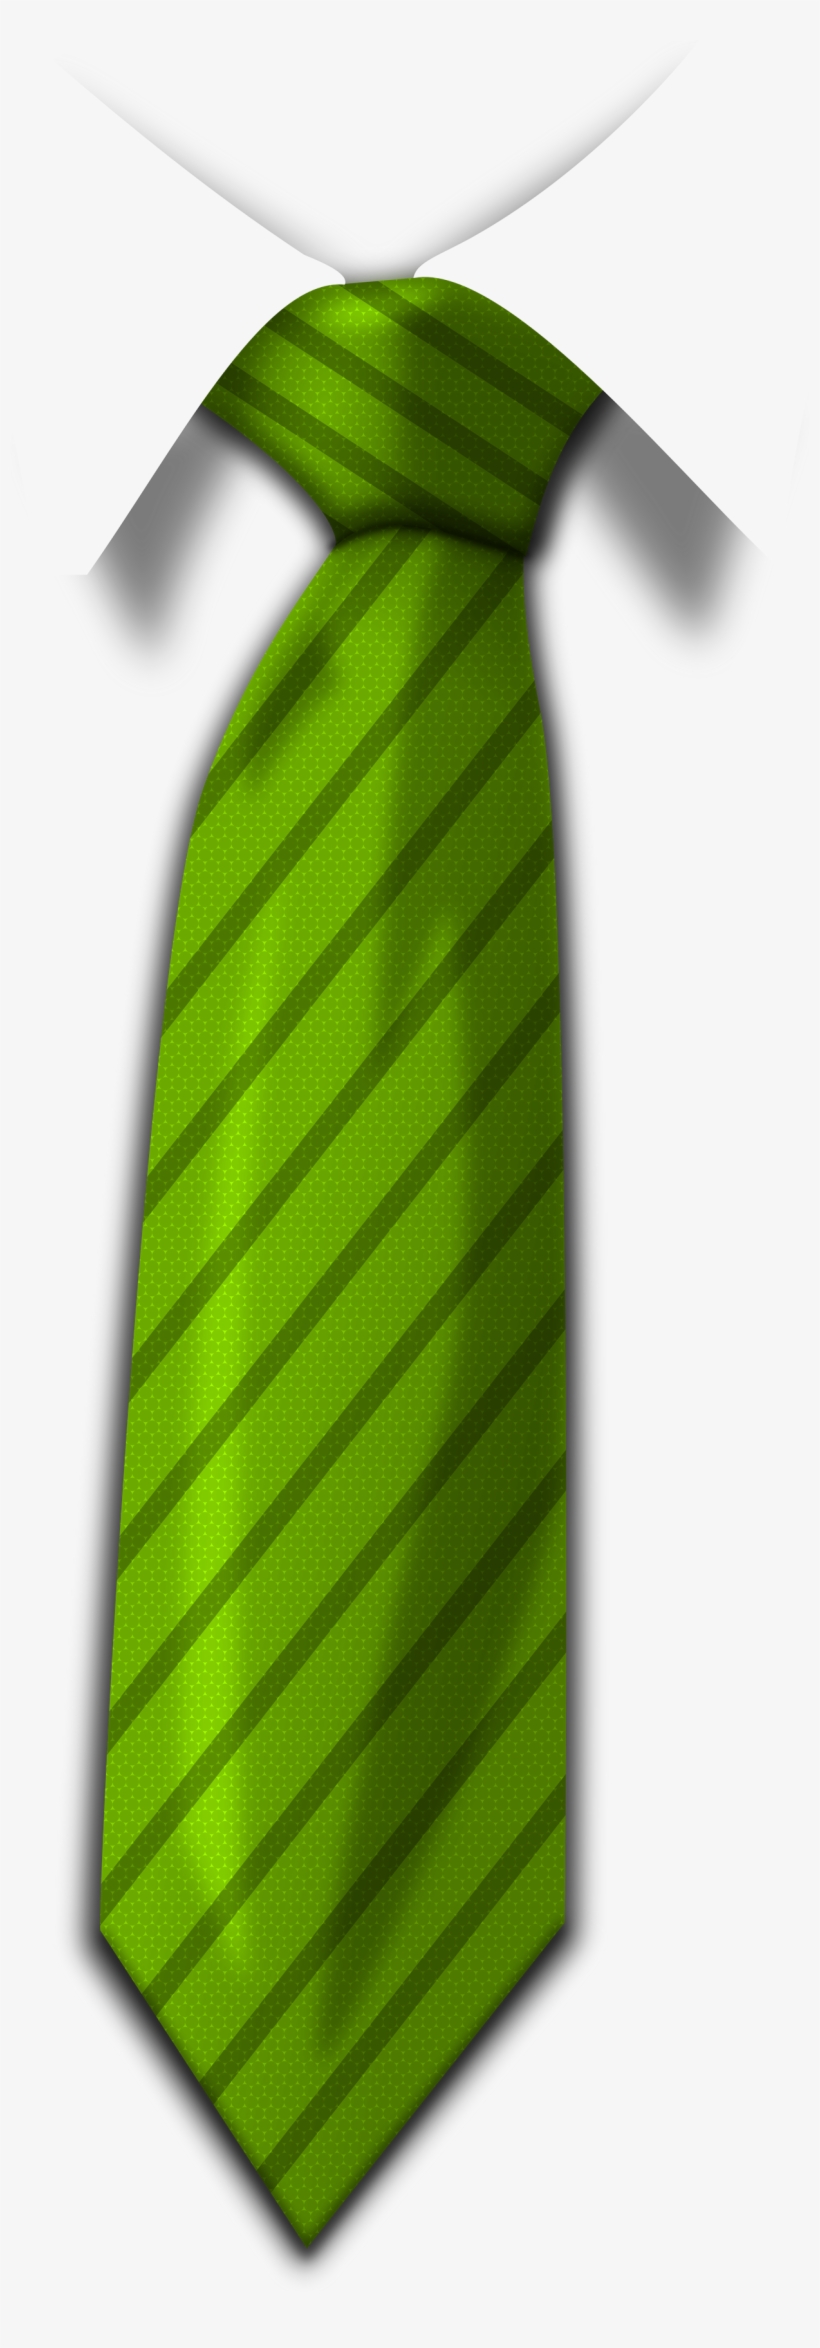 Green Tie Png Image - Green Tie Png, transparent png #104363